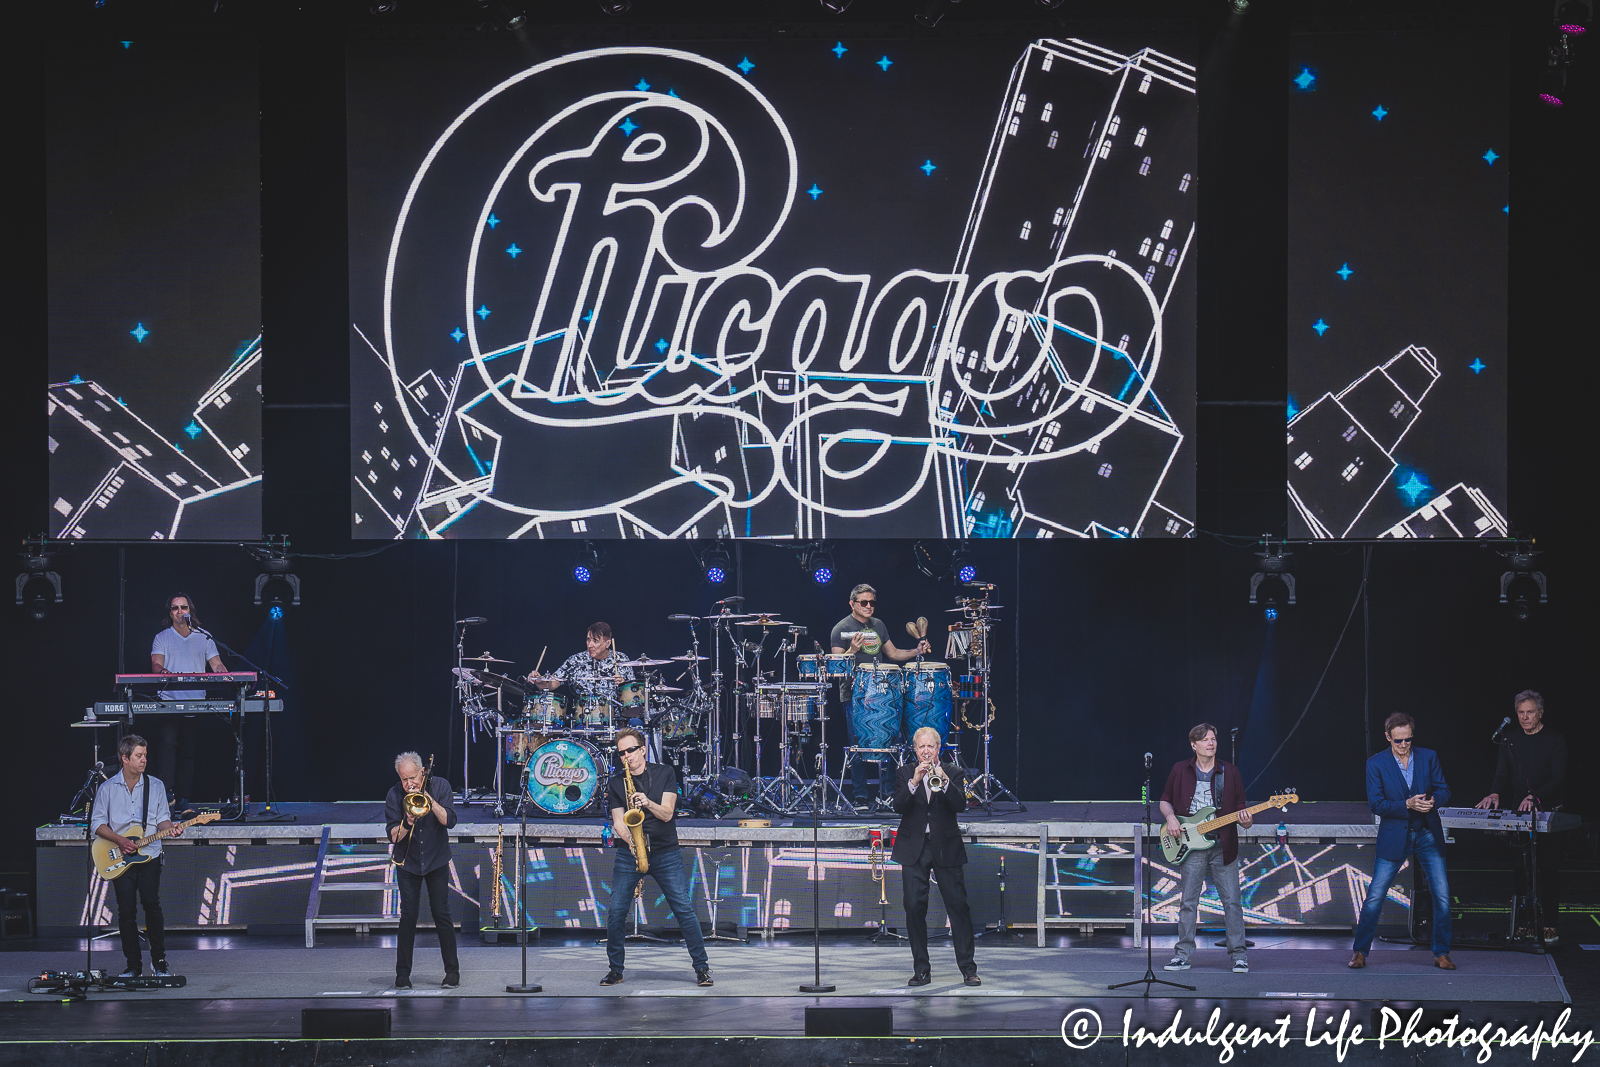 Rock band Chicago performing live in concert at Kansas City's Starlight Theatre on May 26, 2023.